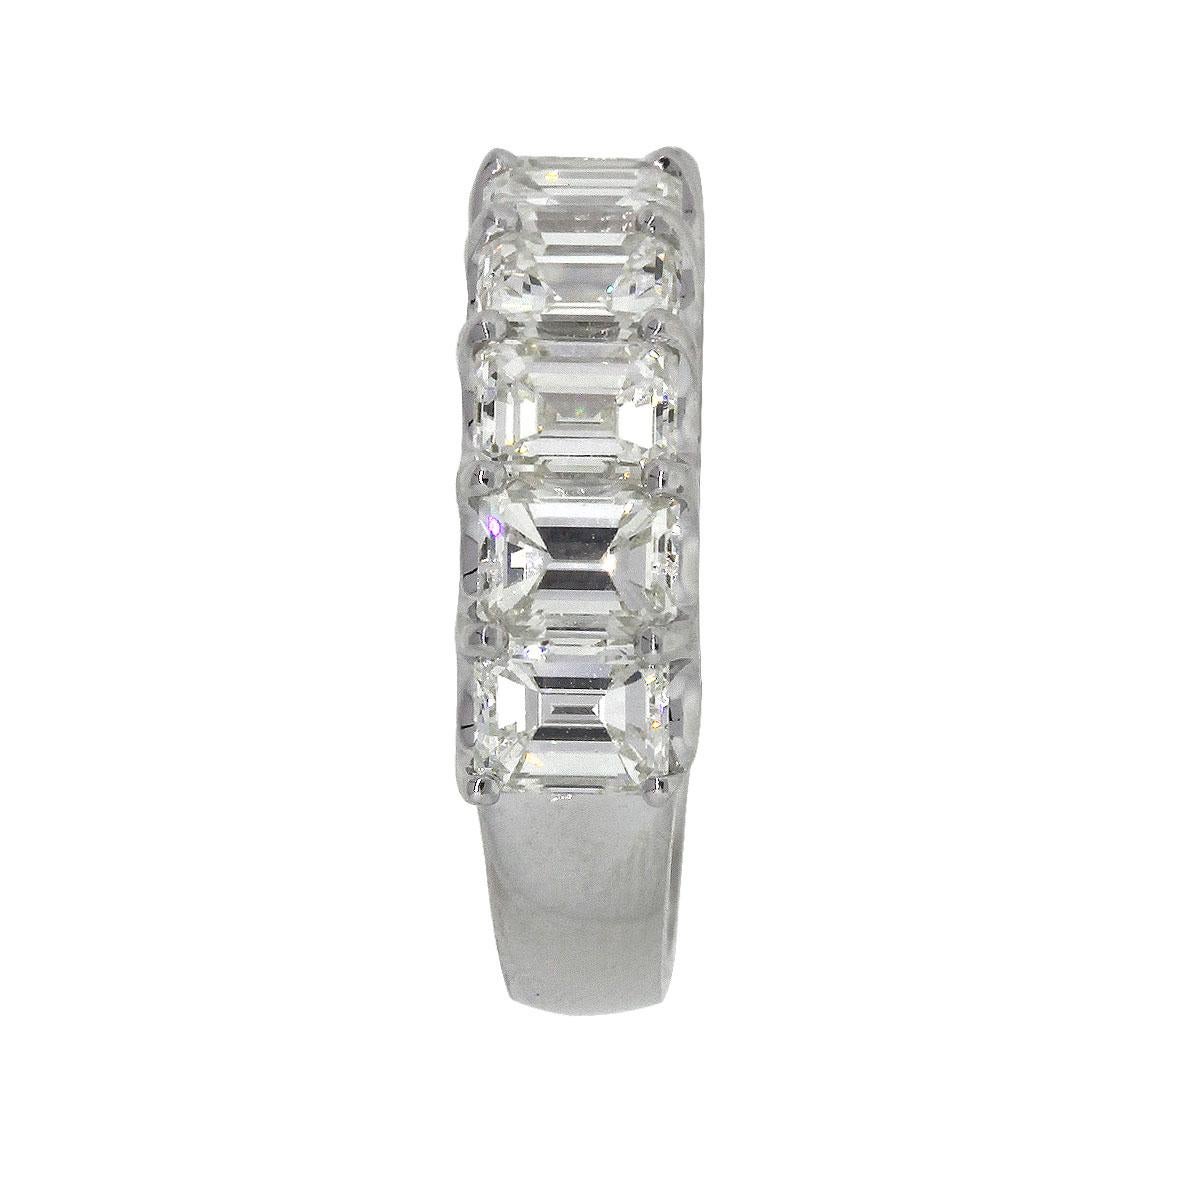 Material: 18k White Gold
Diamond Details: 11 stones, approximately 5.32ctw of Emerald Cut Diamonds. Diamonds are G/H in color and SI in clarity
Size: 6.25
Total Weight: 5.5g (3.5dwt)
Measurements: 0.90″ x 0.20″ x 0.85″
SKU: A30312248